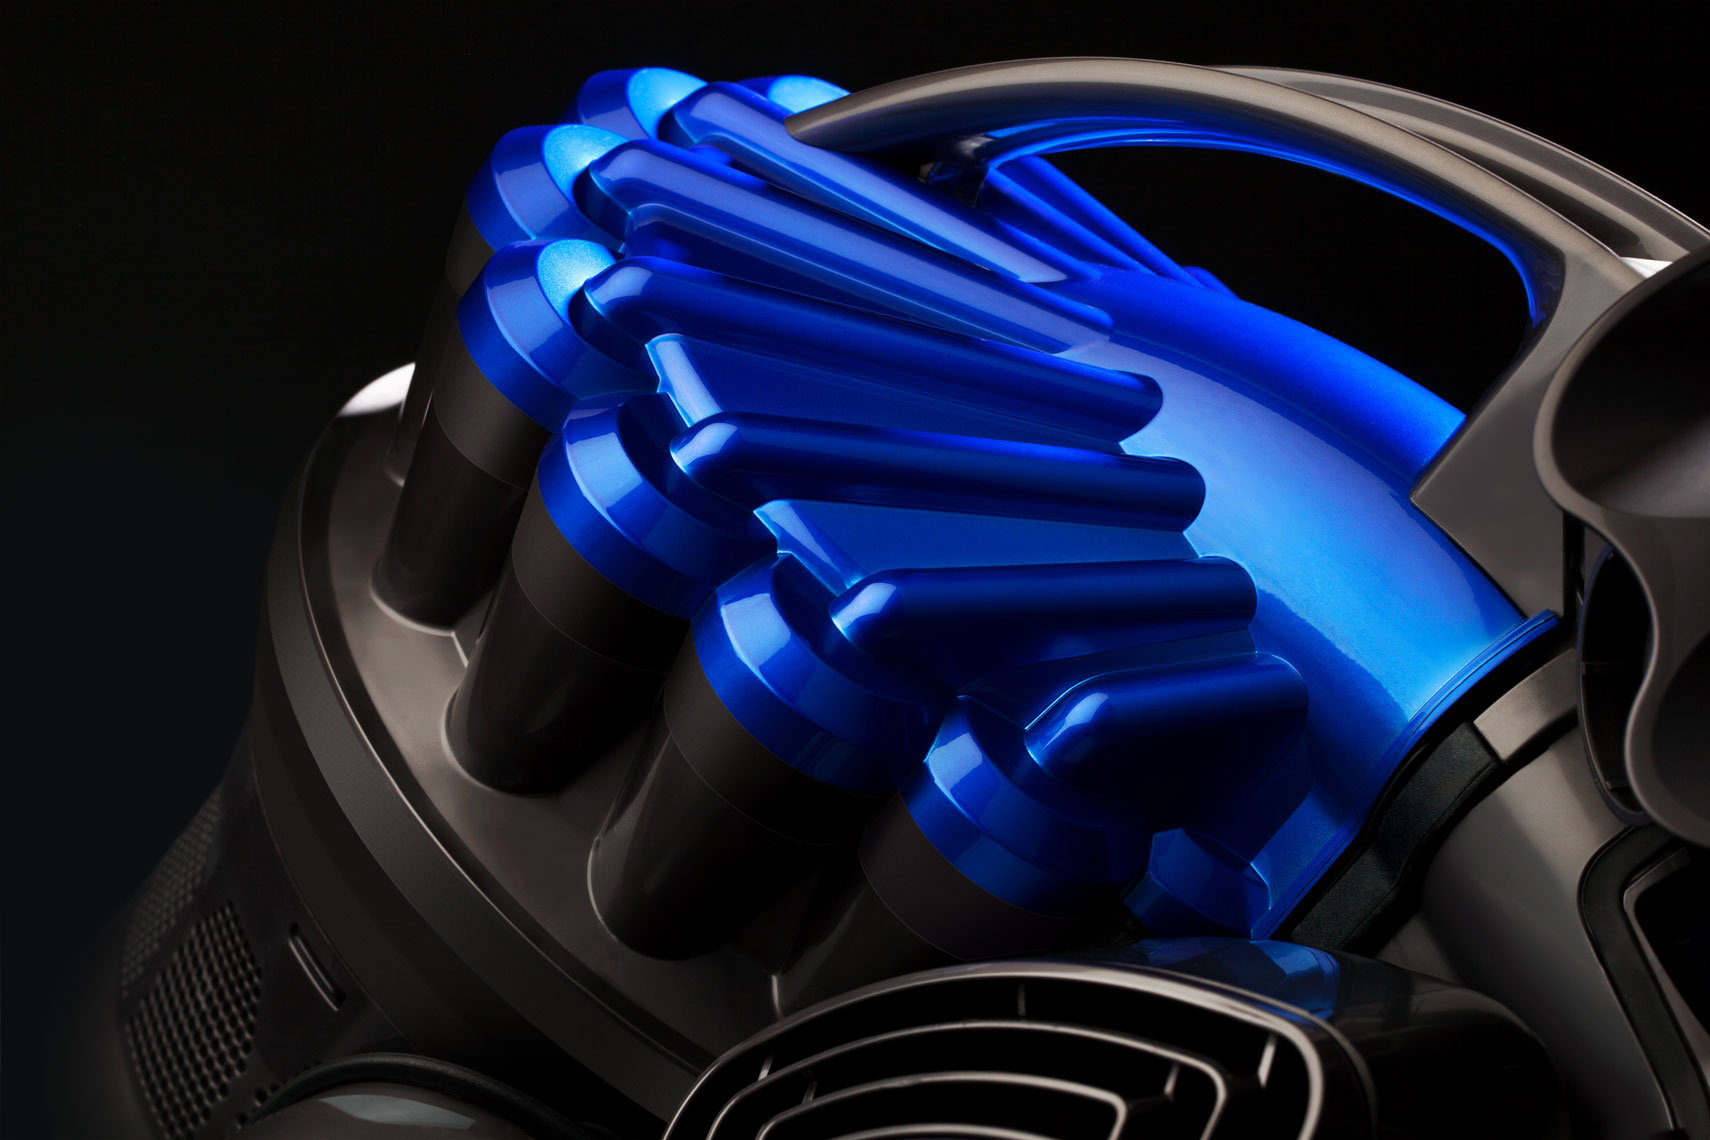 Product Photography Gadgets Dyson Vacuum Canister Profile Detail View Of Blue Top Chicago